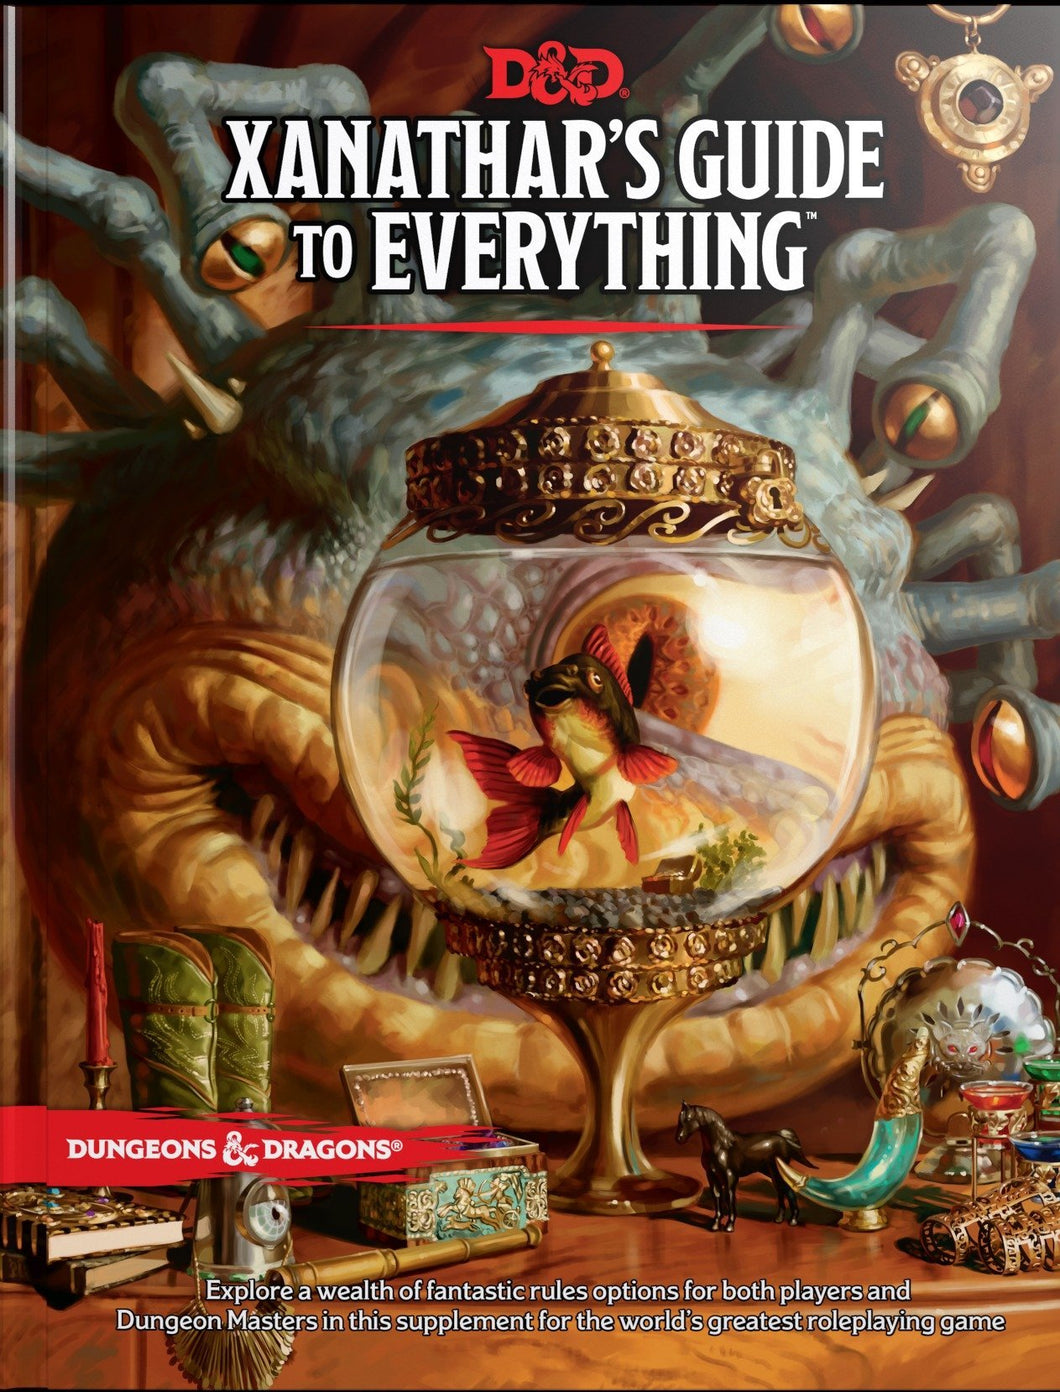 Dungeons & Dragons (D&D) : 5th Edition Xanathar's Guide To Everything